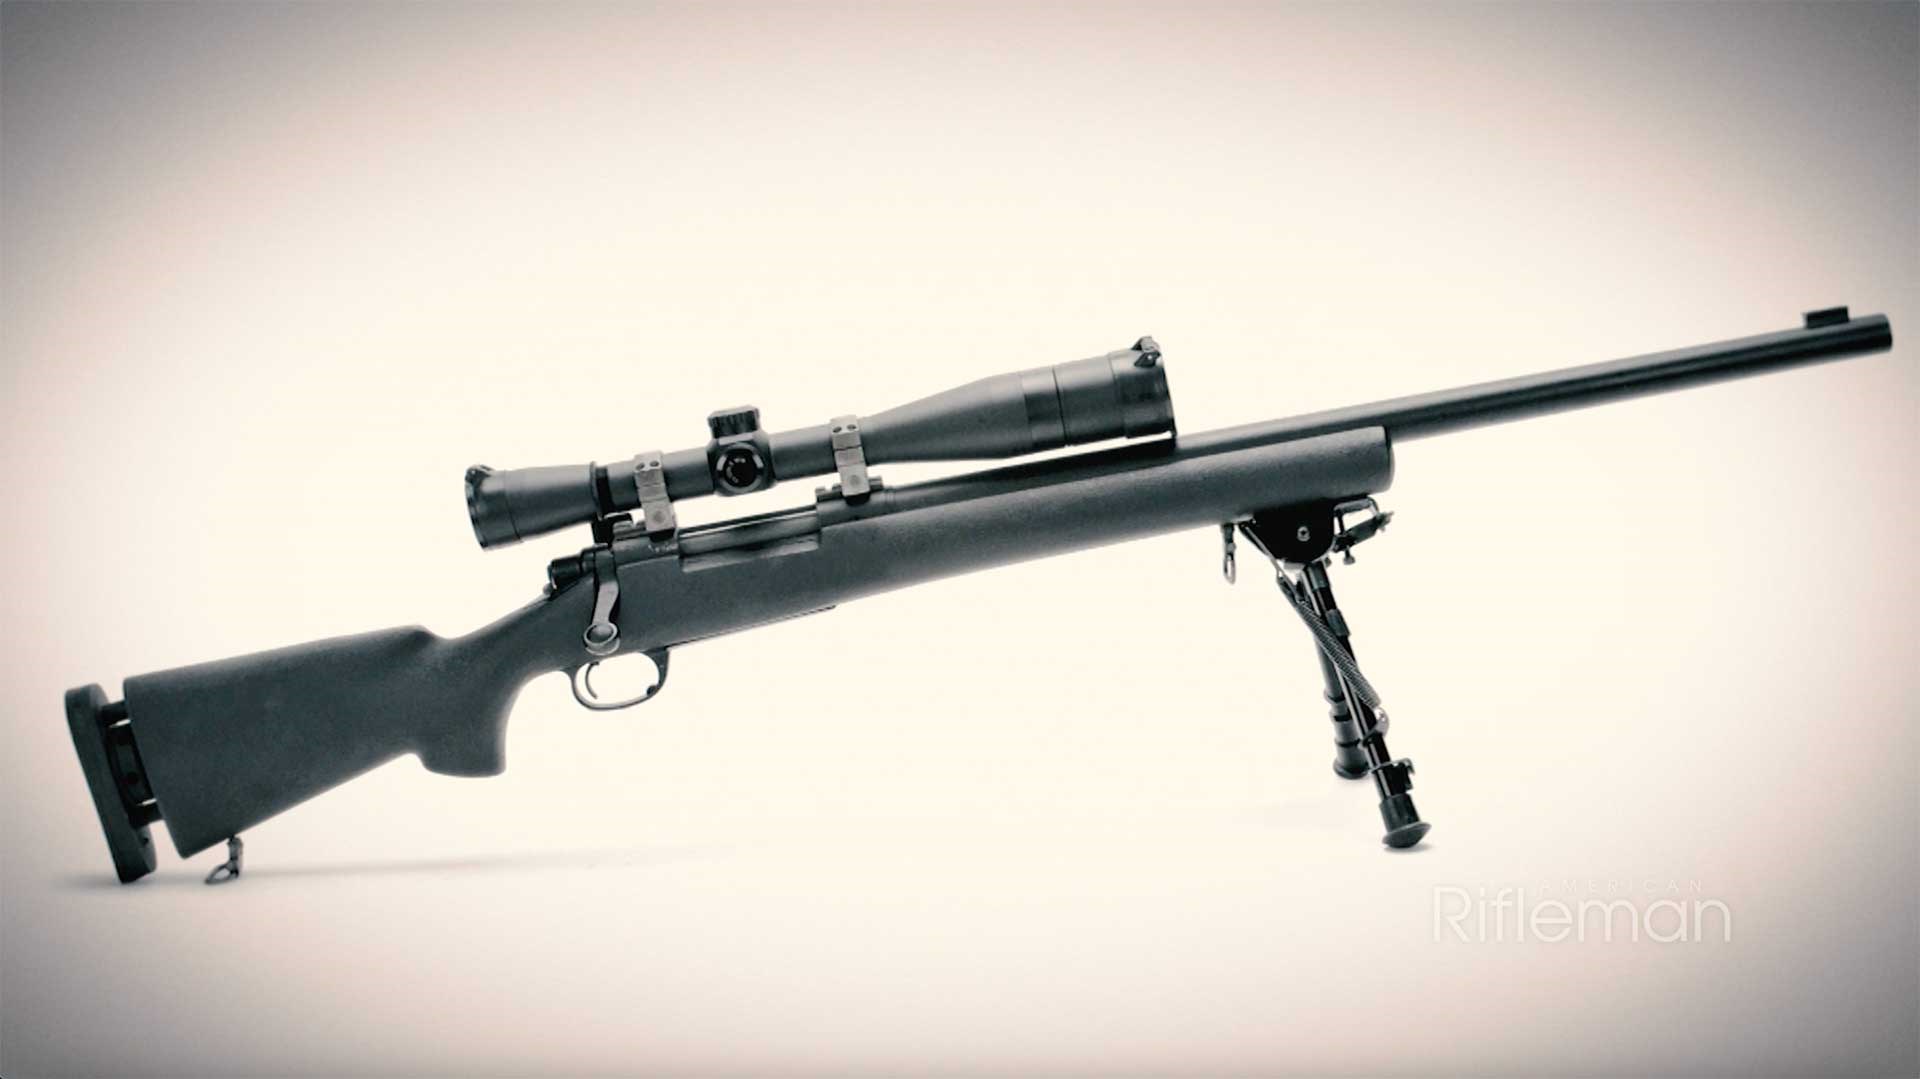 Right side of the U.S. Army M24 sniper rifle, equipped with a Leupold riflescope.